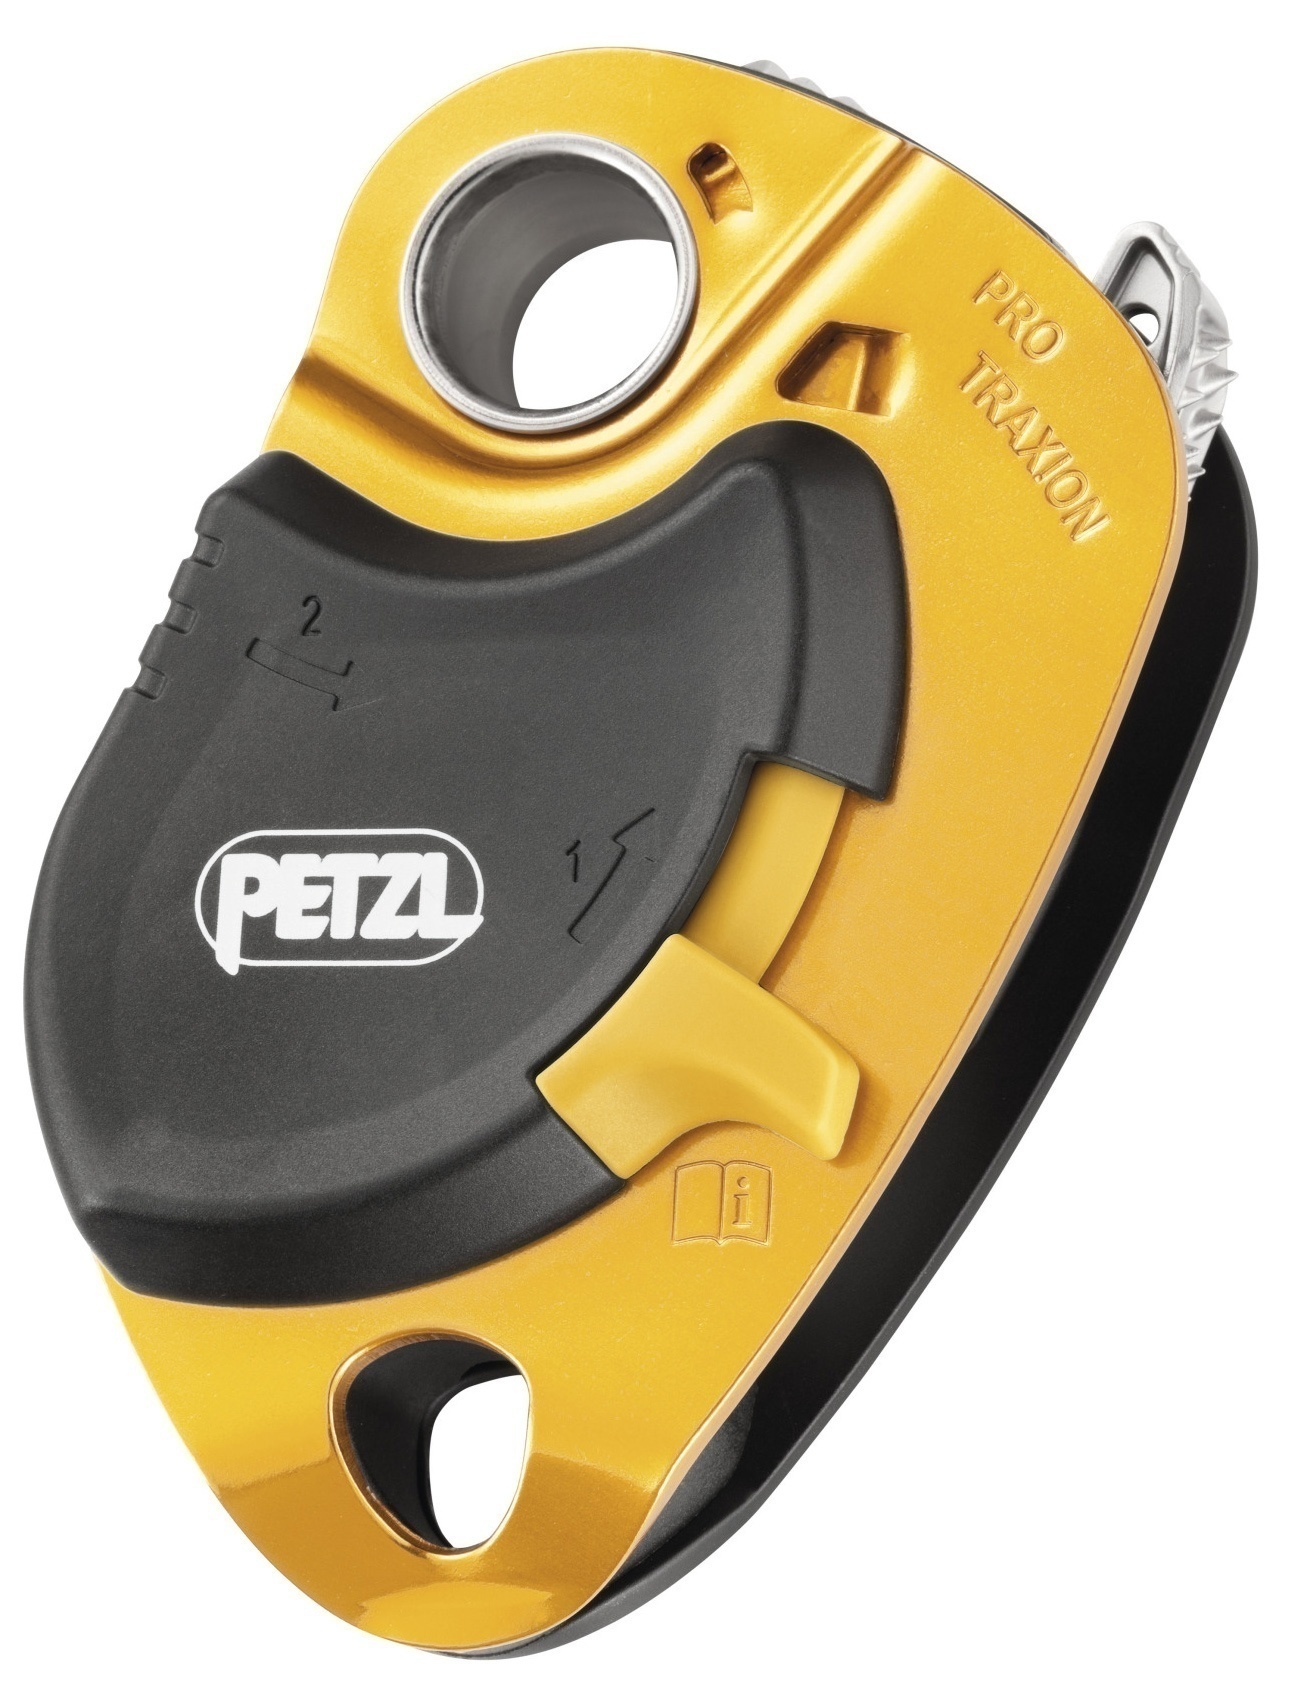 P51 Petzl Pro Traxion Highly Efficient Self Jamming Pulley Rope Clamp from Columbia Safety